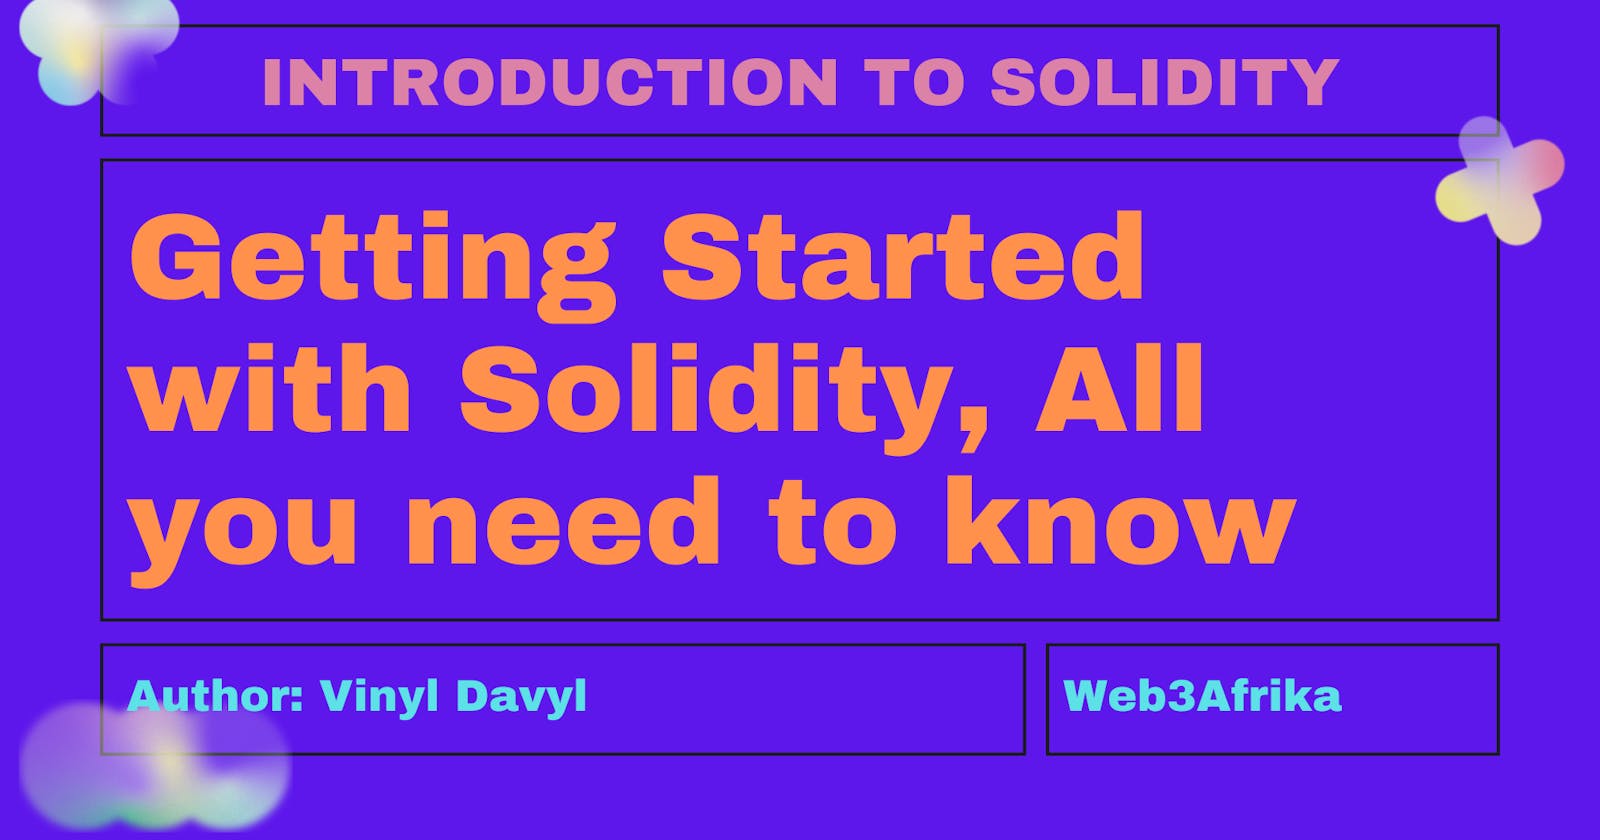 Getting Started with Solidity, All you need to know (A Step by Step Guide).